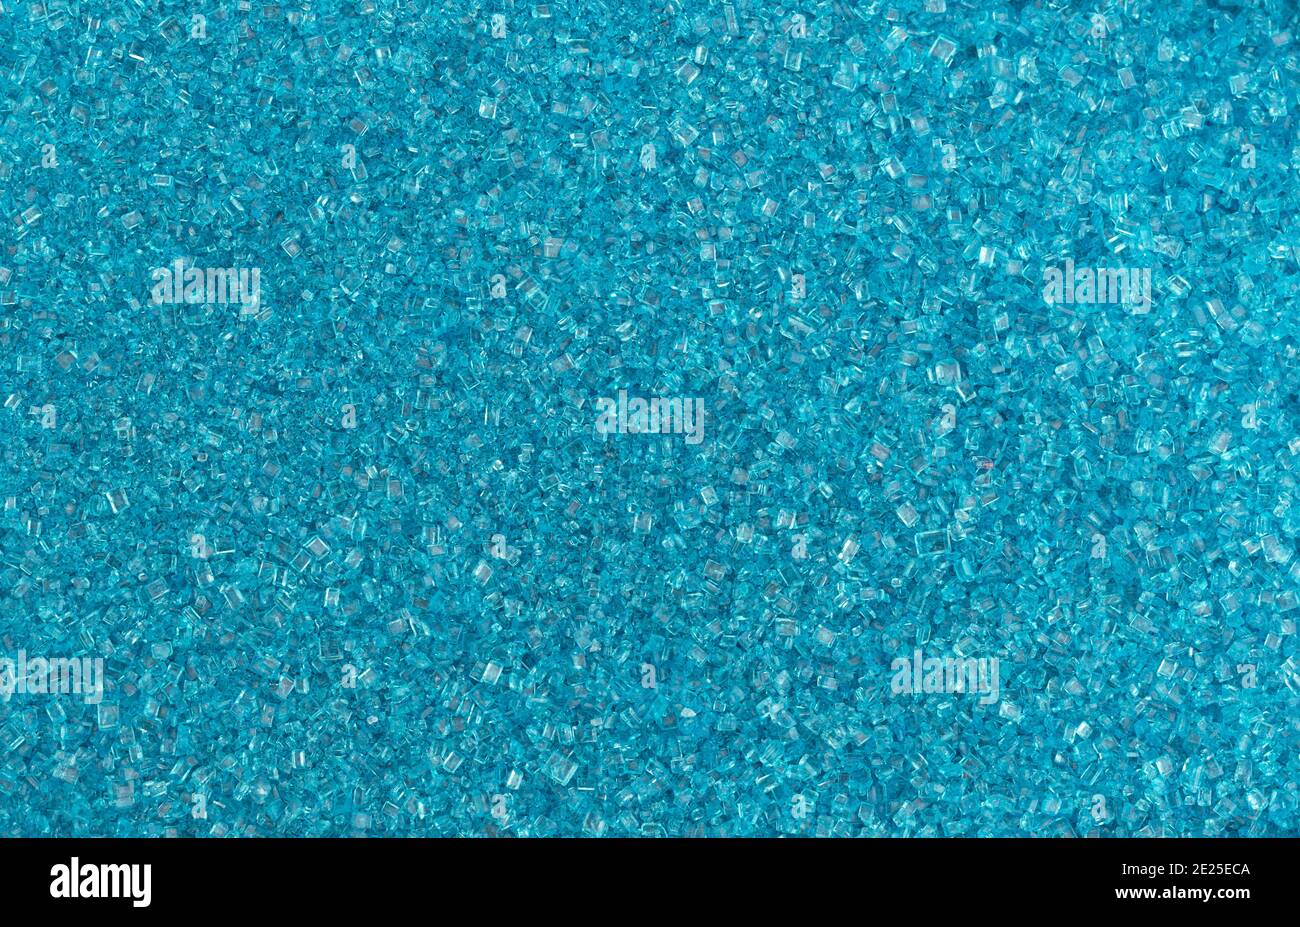 Close view of a portion of blue sanding sugar granules. Stock Photo